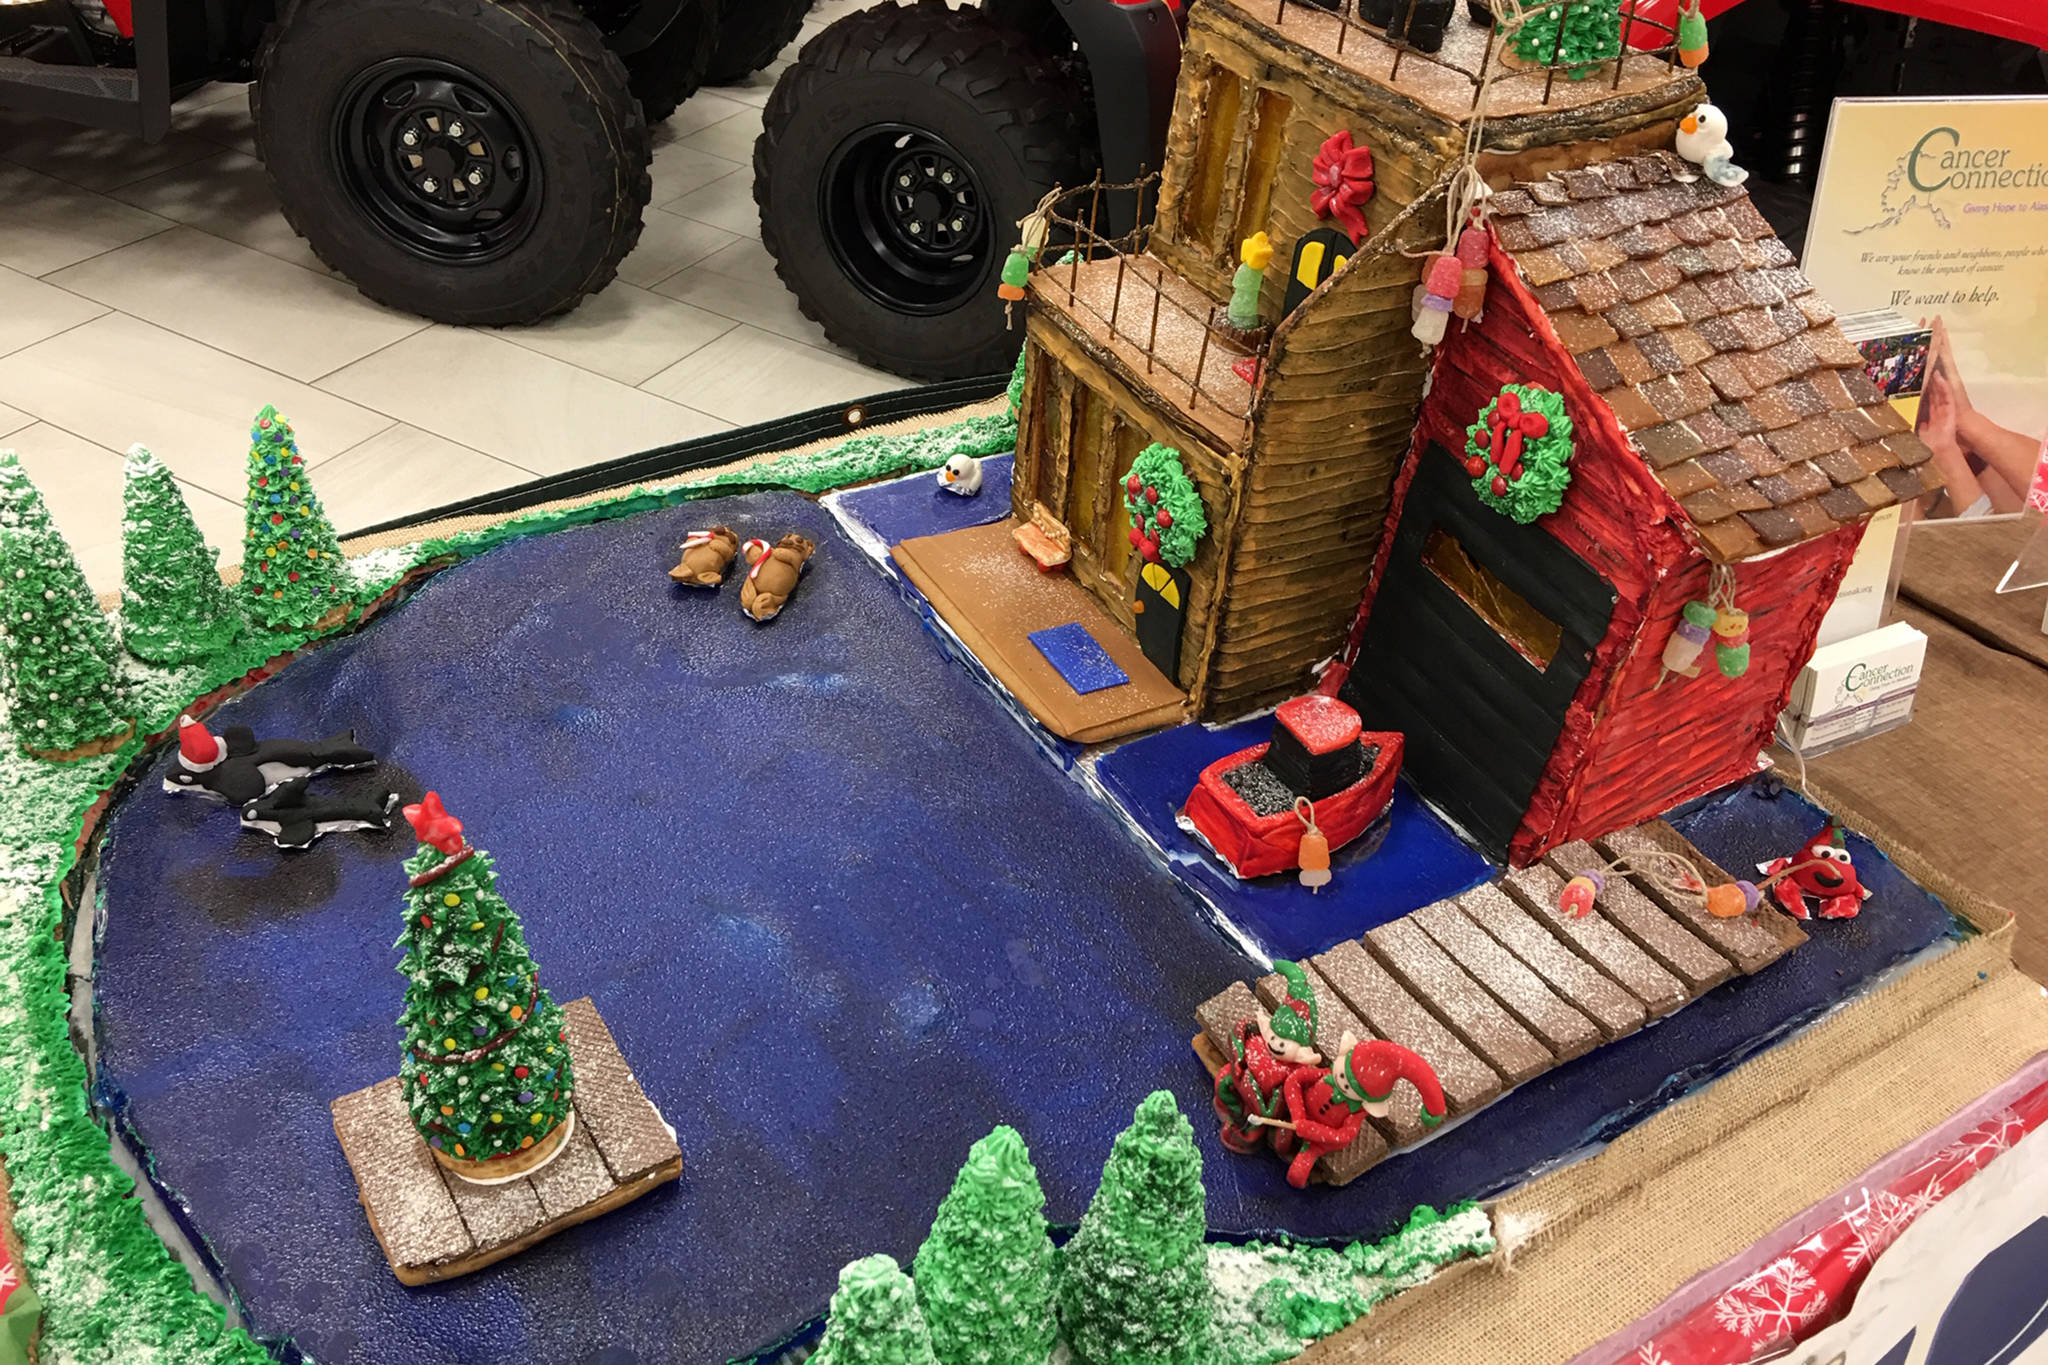 Ron’s Apothecary’s gingerbread house included plenty of edible wildlife. It was one of 10 gingerbread structures in Mendenhall Auto Center’s fundraising contest that ended Wednesday, Dec. 19, 2018. (Courtesy Photo | Mendenhall Auto Center)